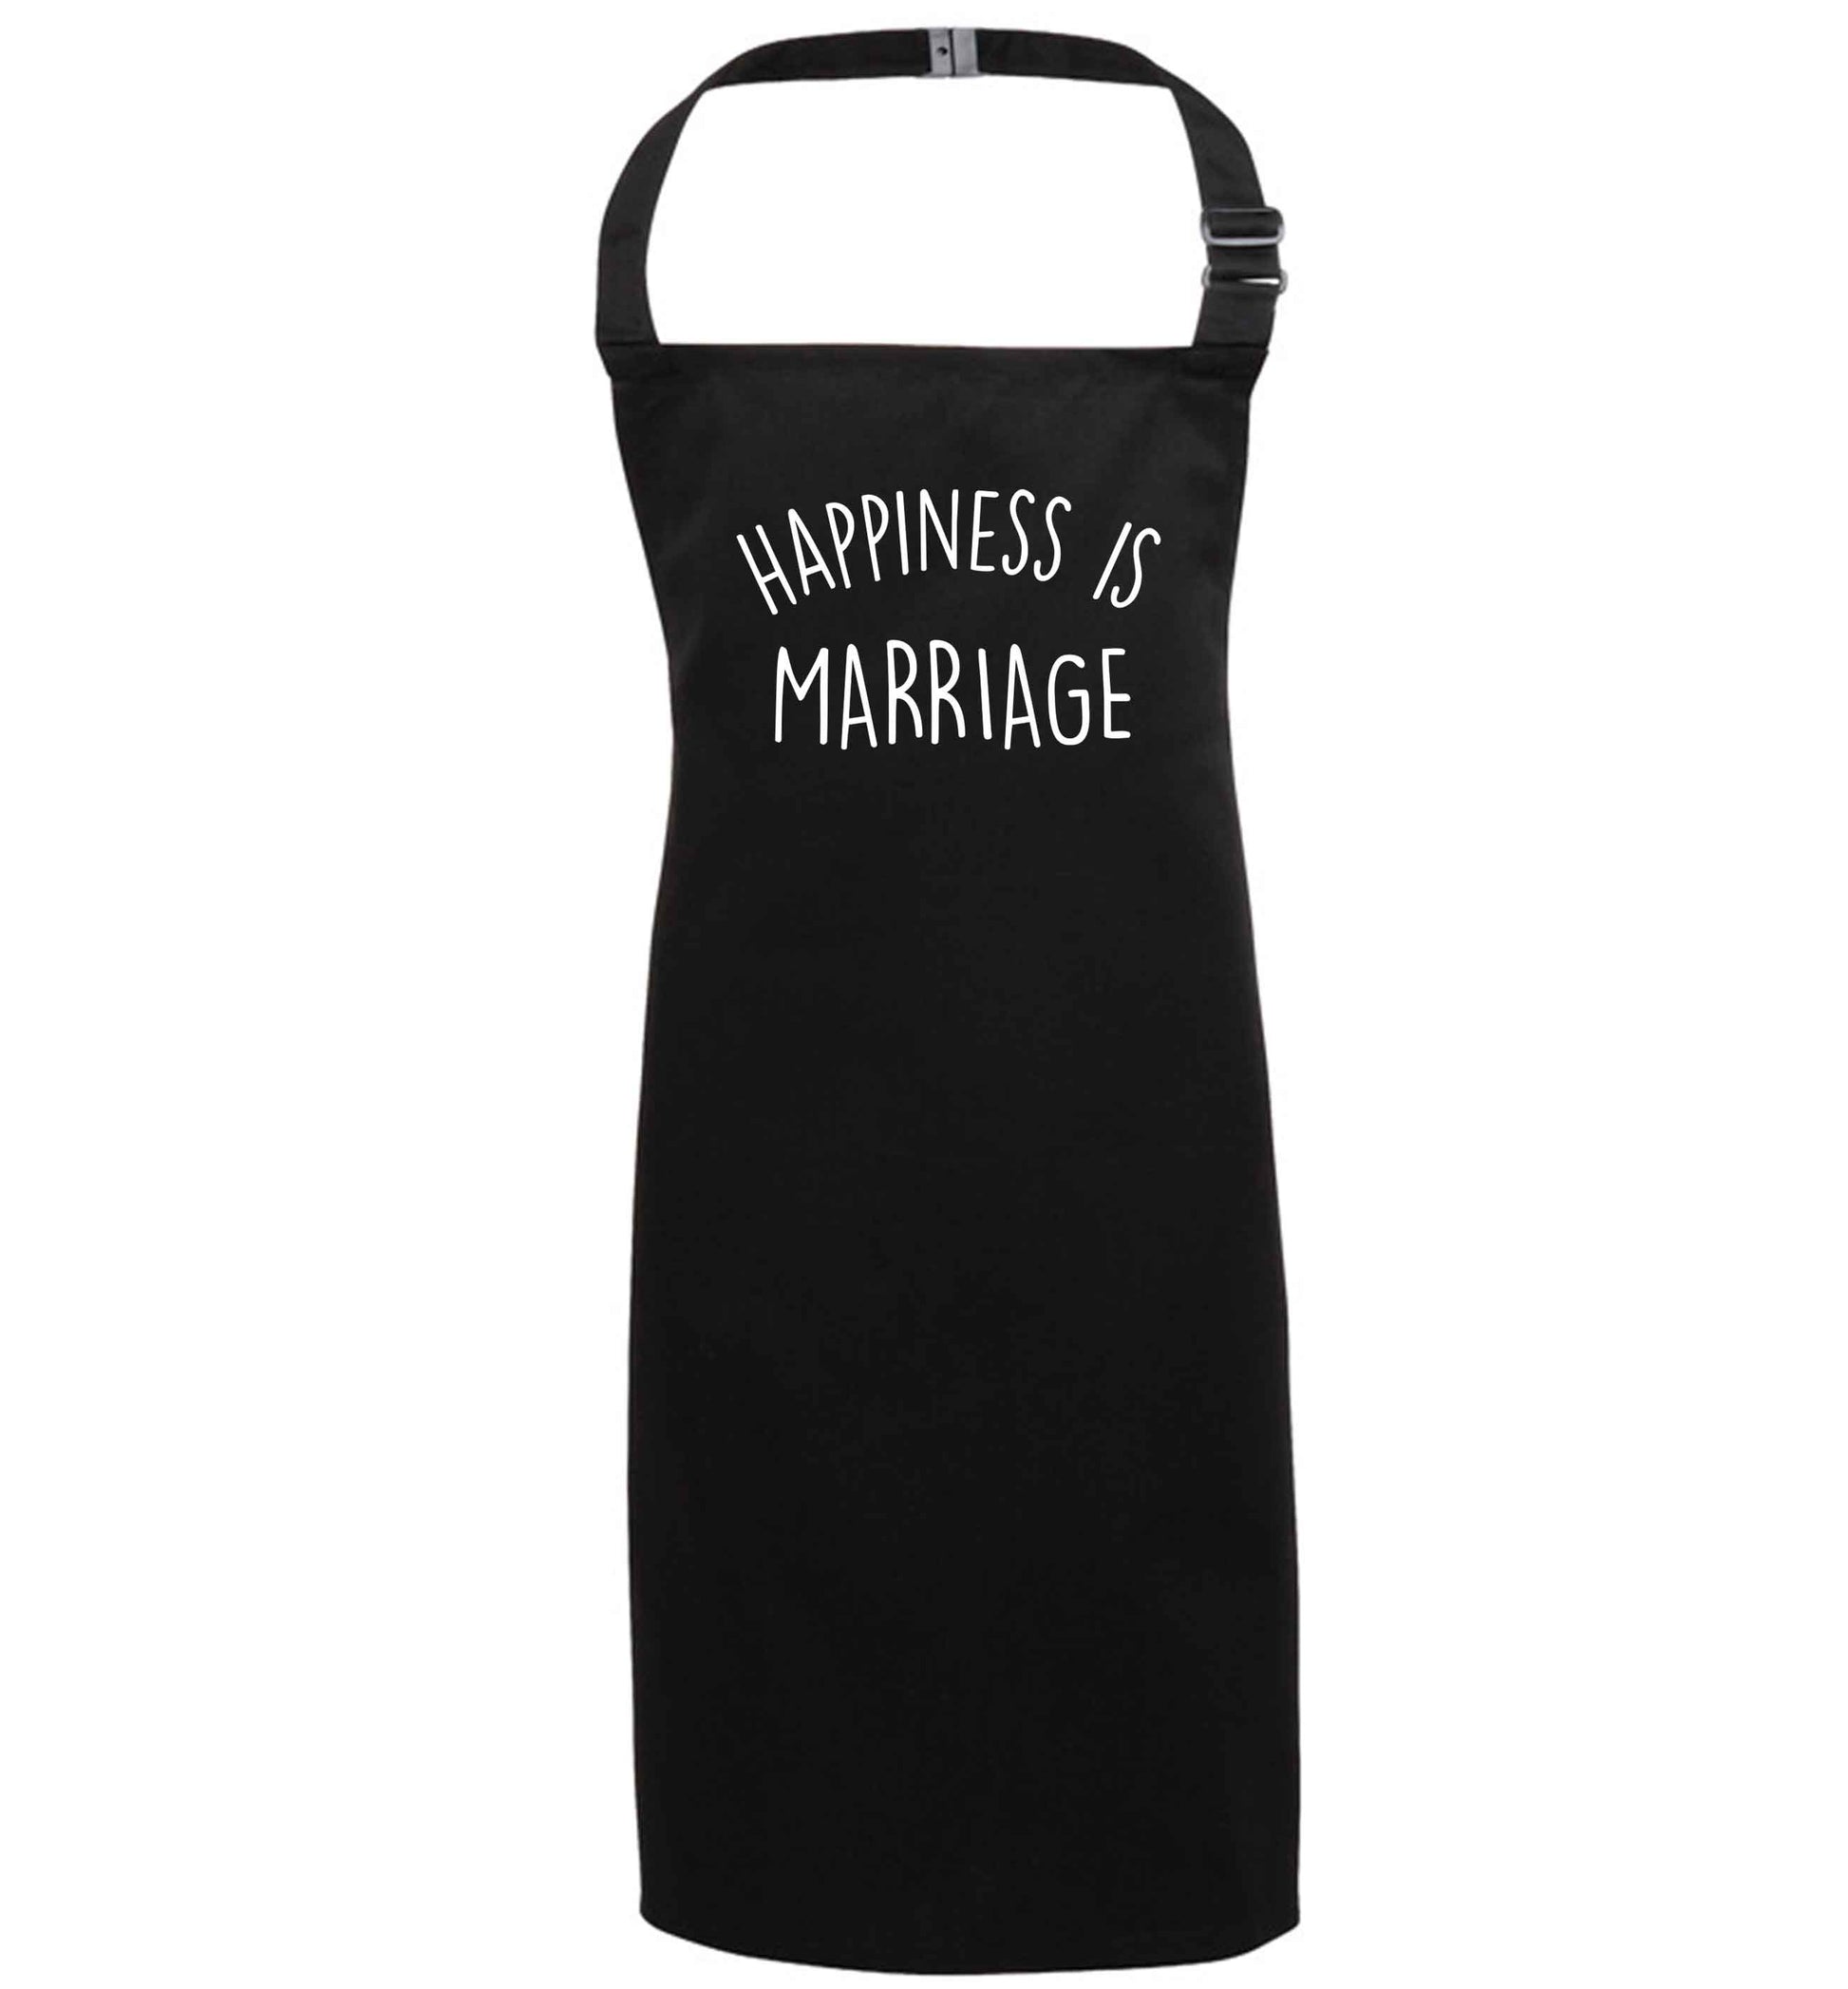 Happiness is wedding planning black apron 7-10 years